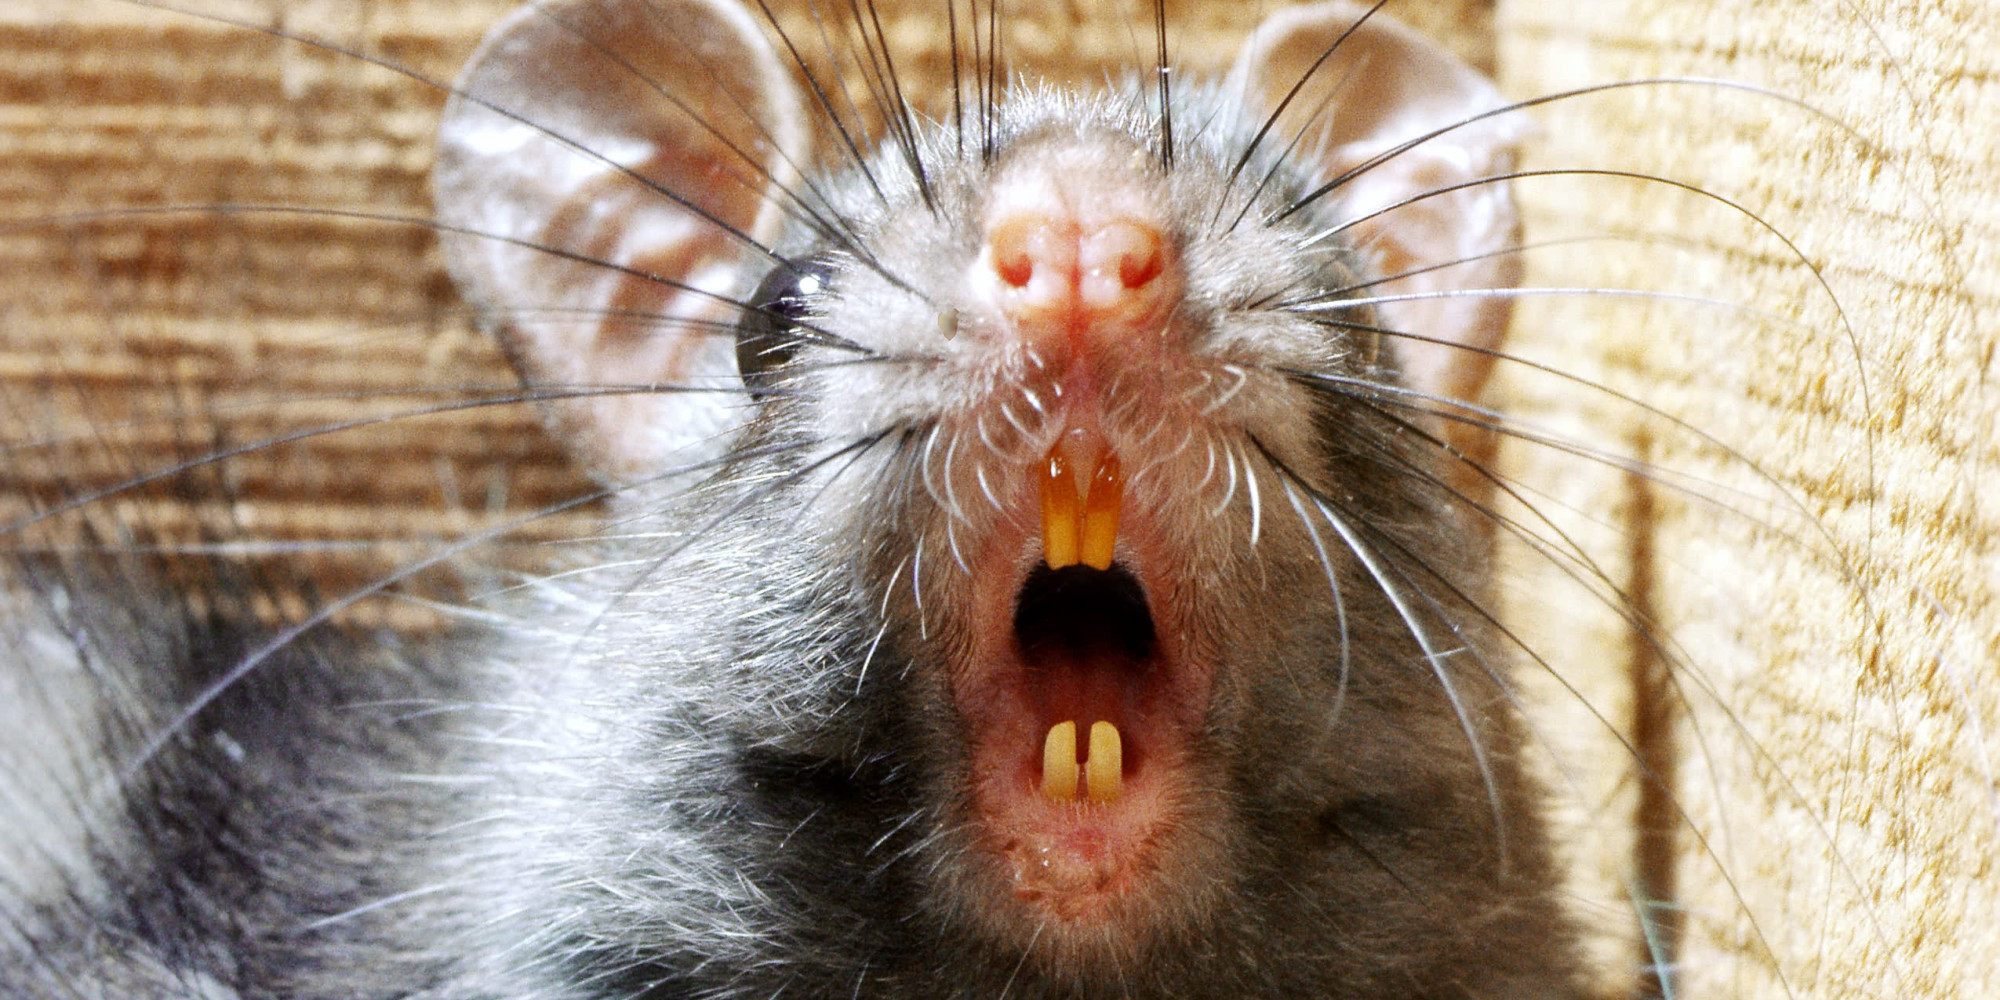 'Rats So Big The Cats Are Scared' Worry Englewood Neighbors | HuffPost